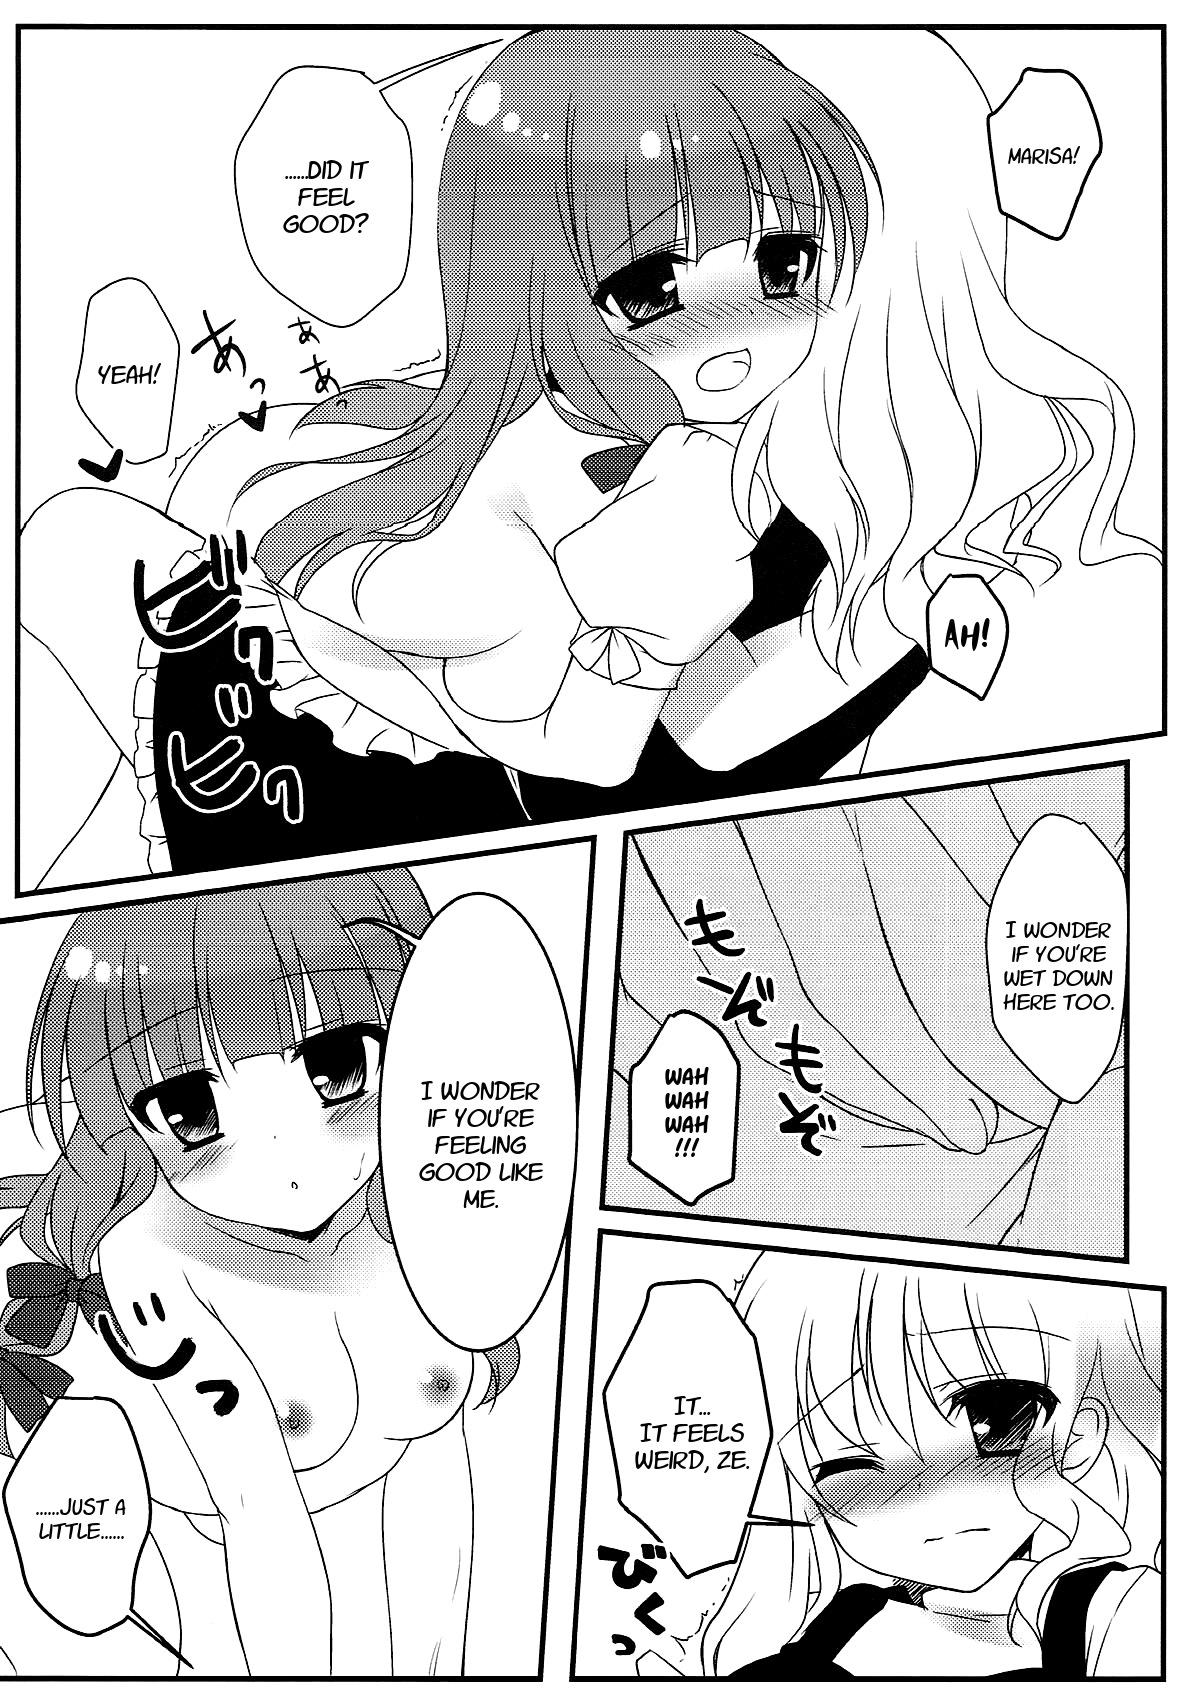 Chubby Mari ni - Help - Touhou project Speculum - Page 11